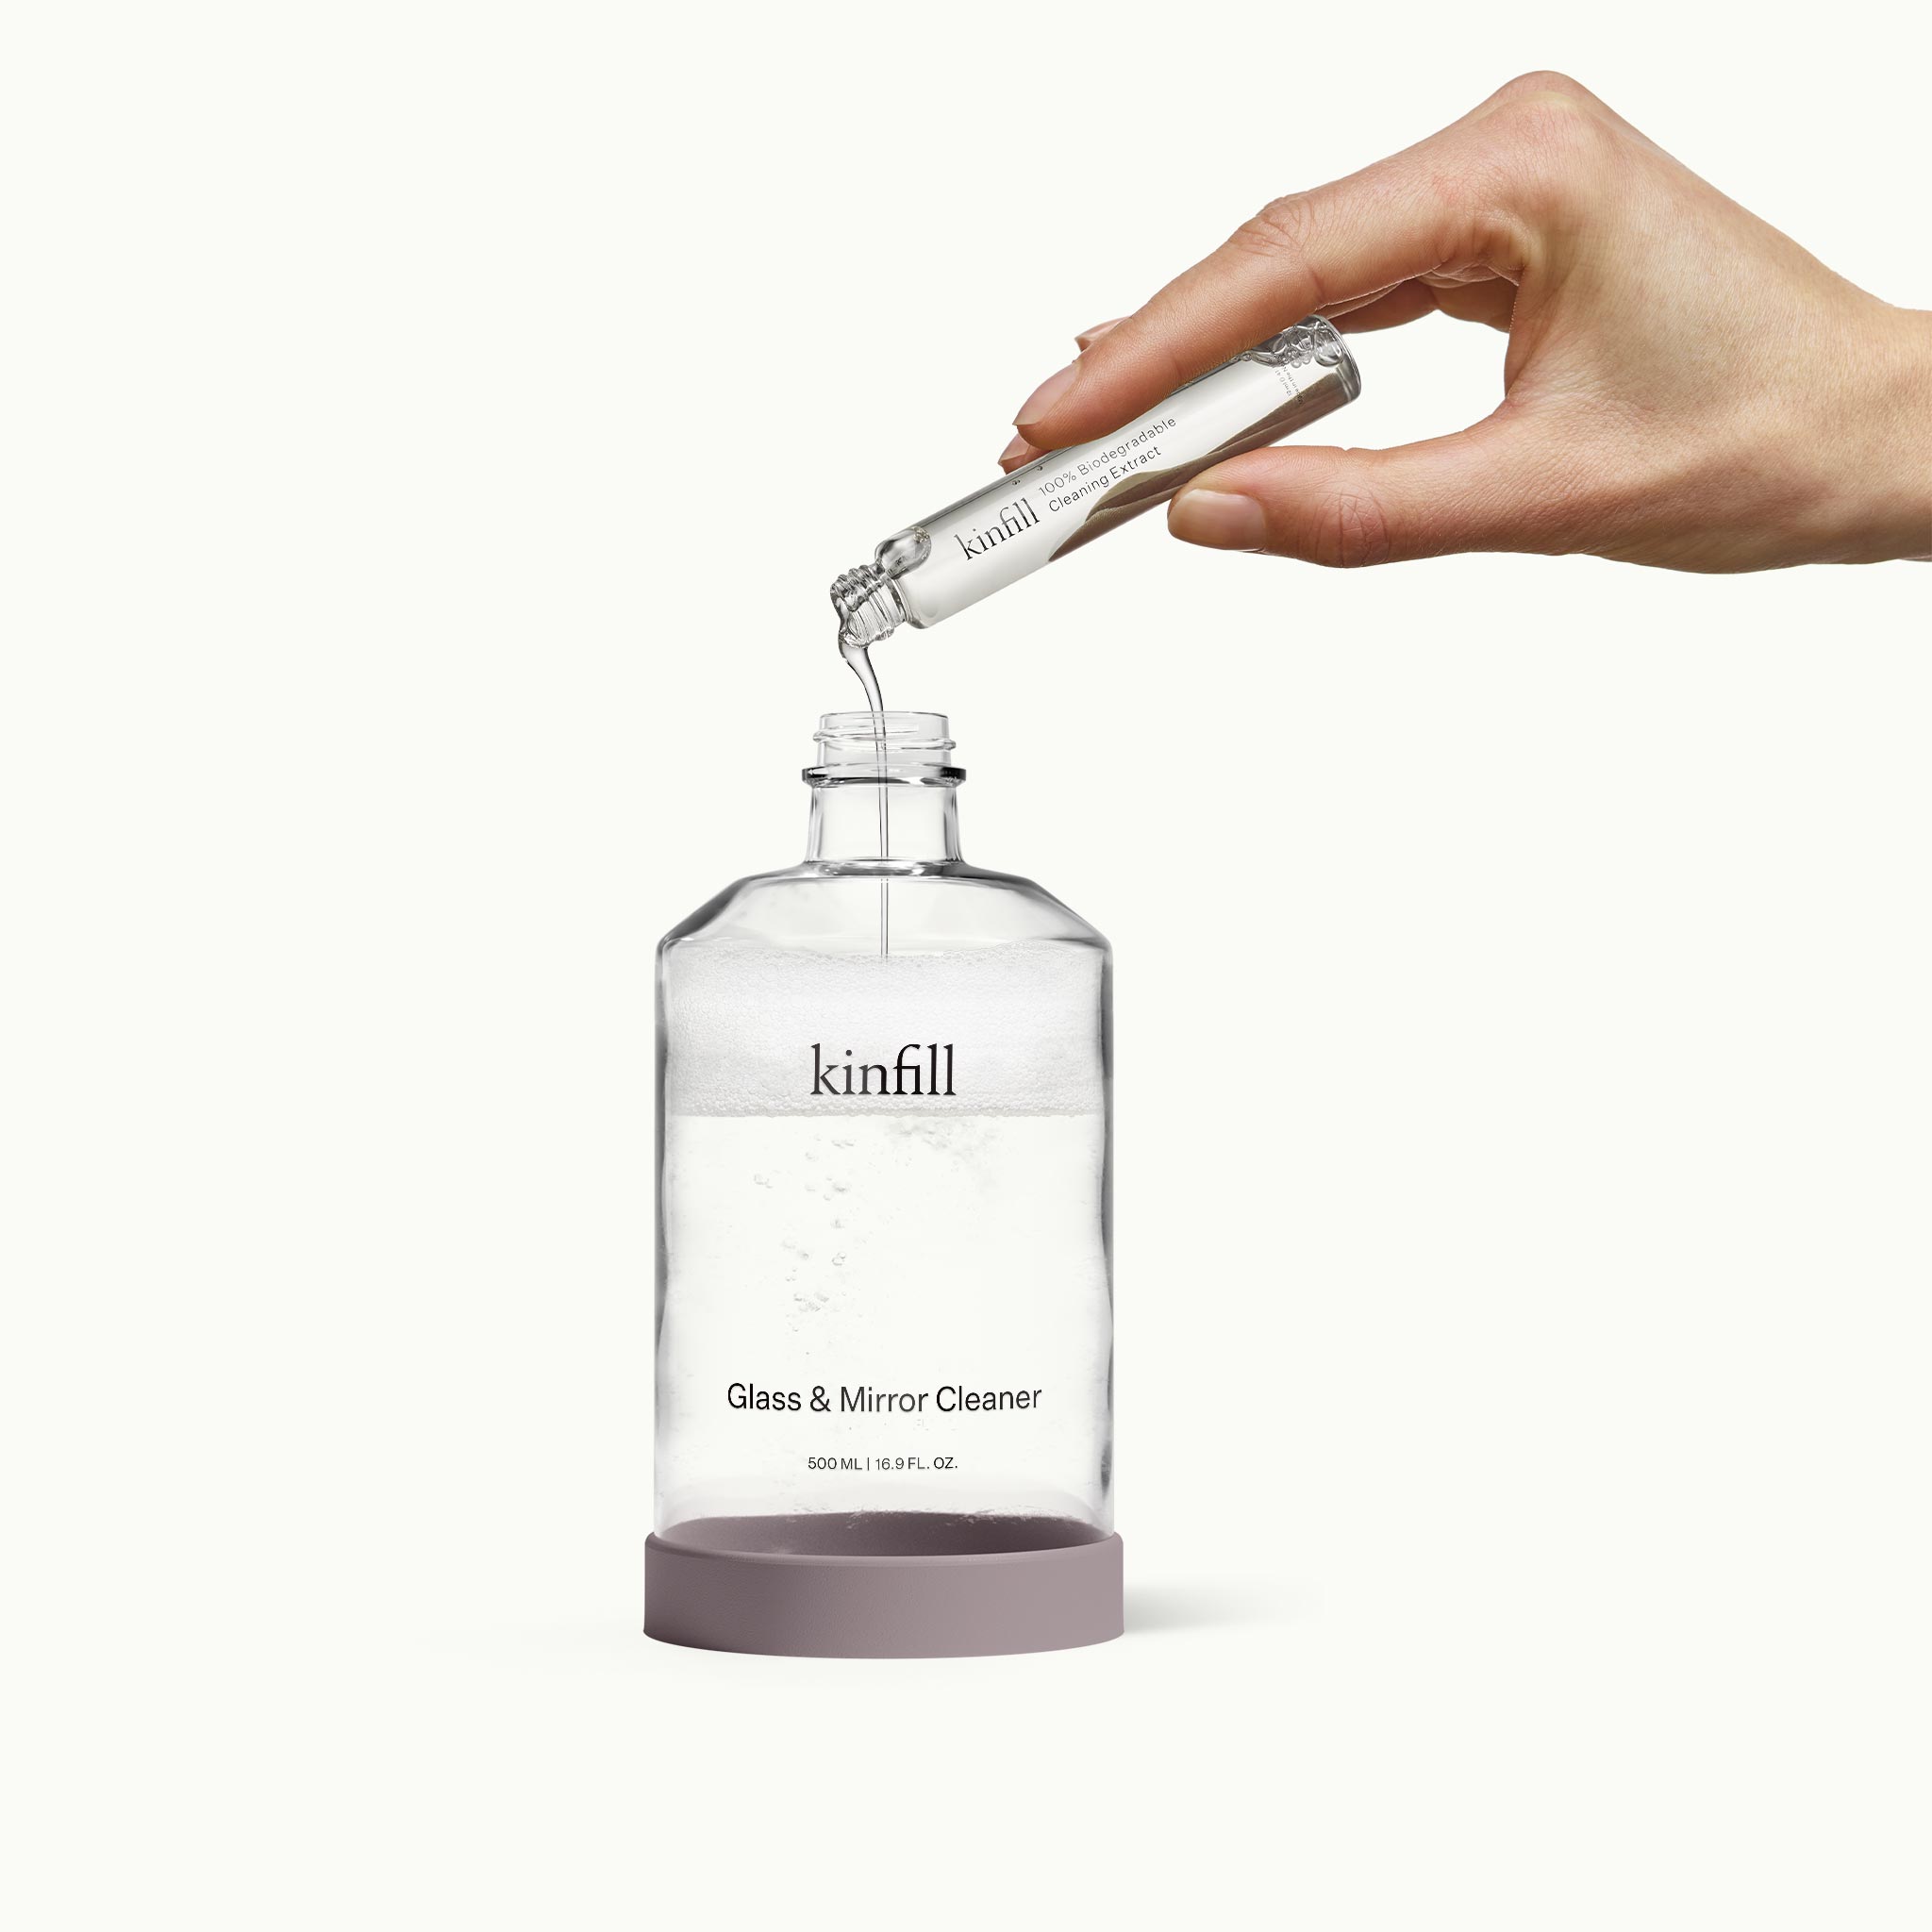 kinfill-glass-mirror-cleaner-refillable_9e457505-9bfe-4f4b-bdc7-4165df99f582.jpg